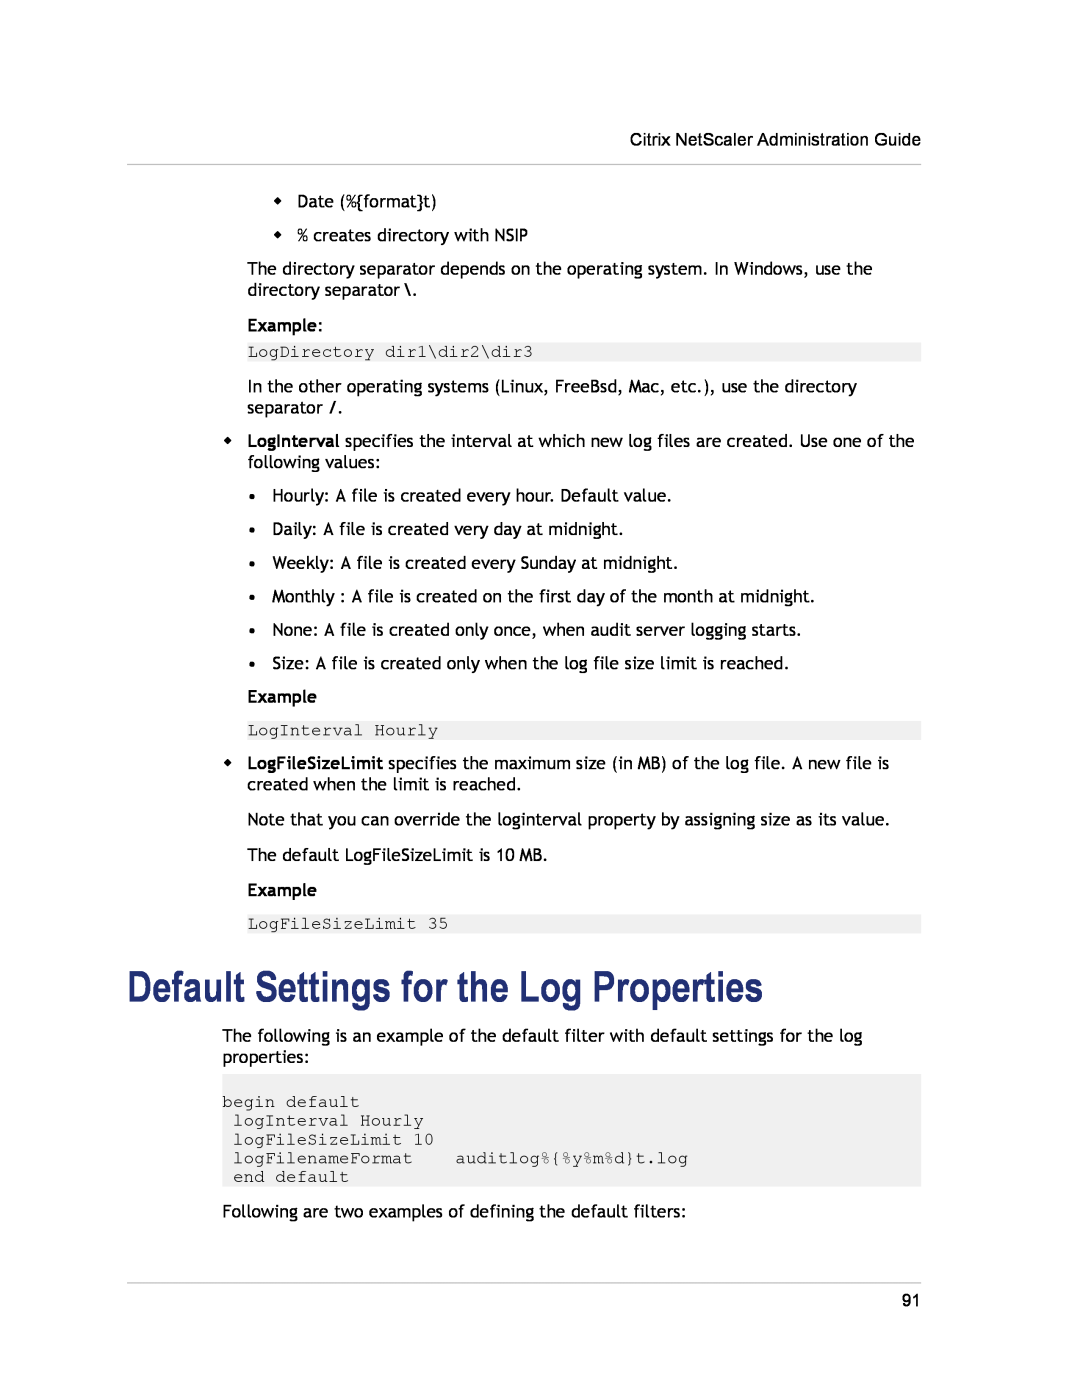 Citrix Systems CITRIX NETSCALER 9.3 manual Default Settings for the Log Properties, Example 